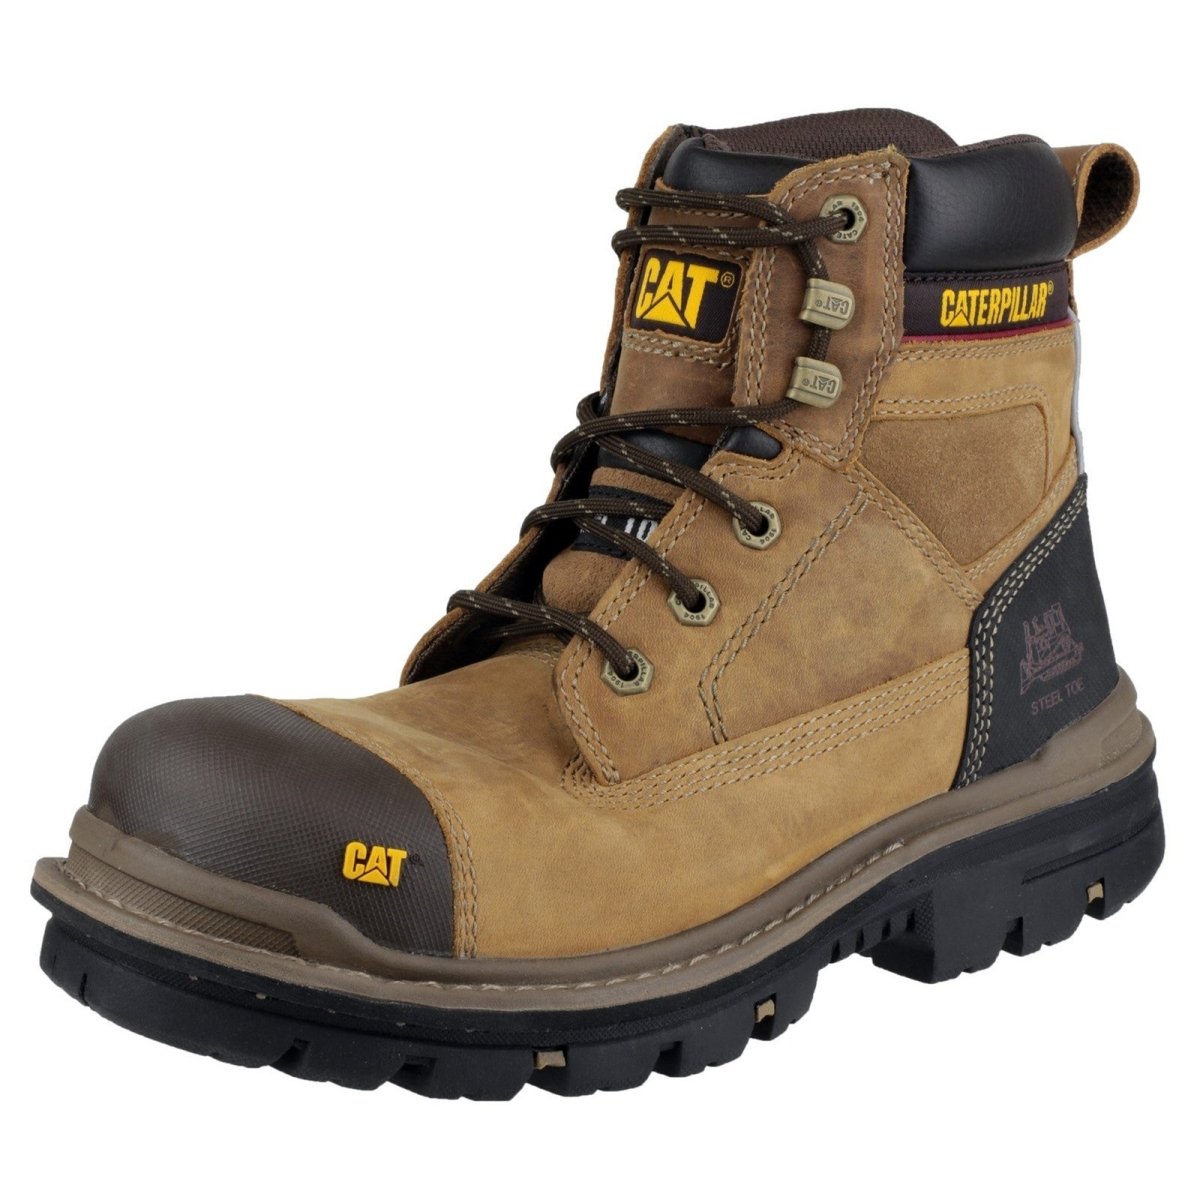 Caterpillar Gravel 6" S3 Steel Toe & Midsole Safety Boots - Shoe Store Direct